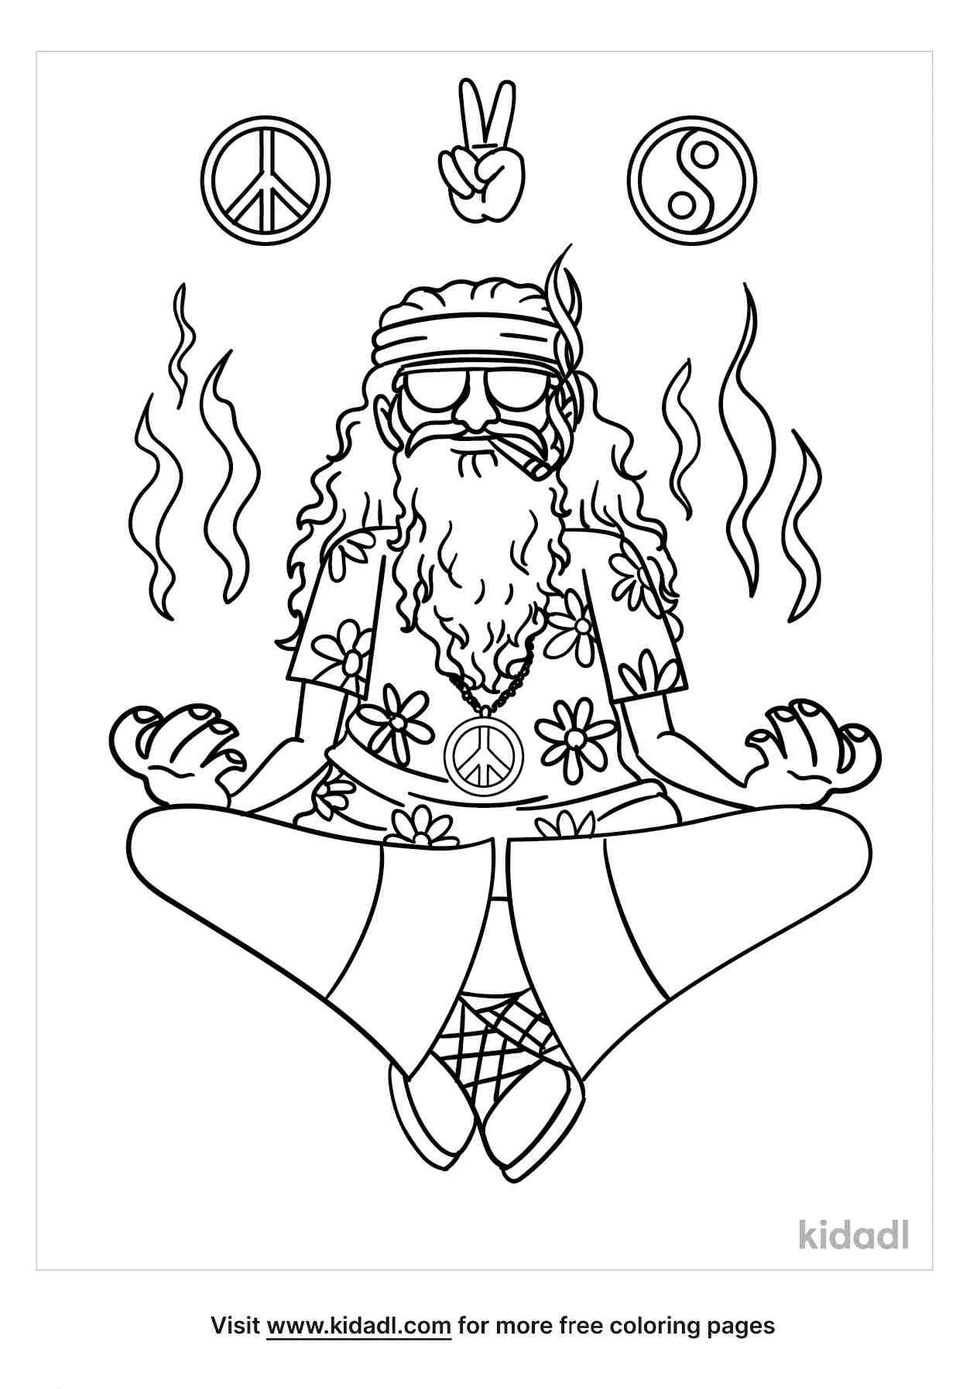 Classic hippie man coloring pages for kids.